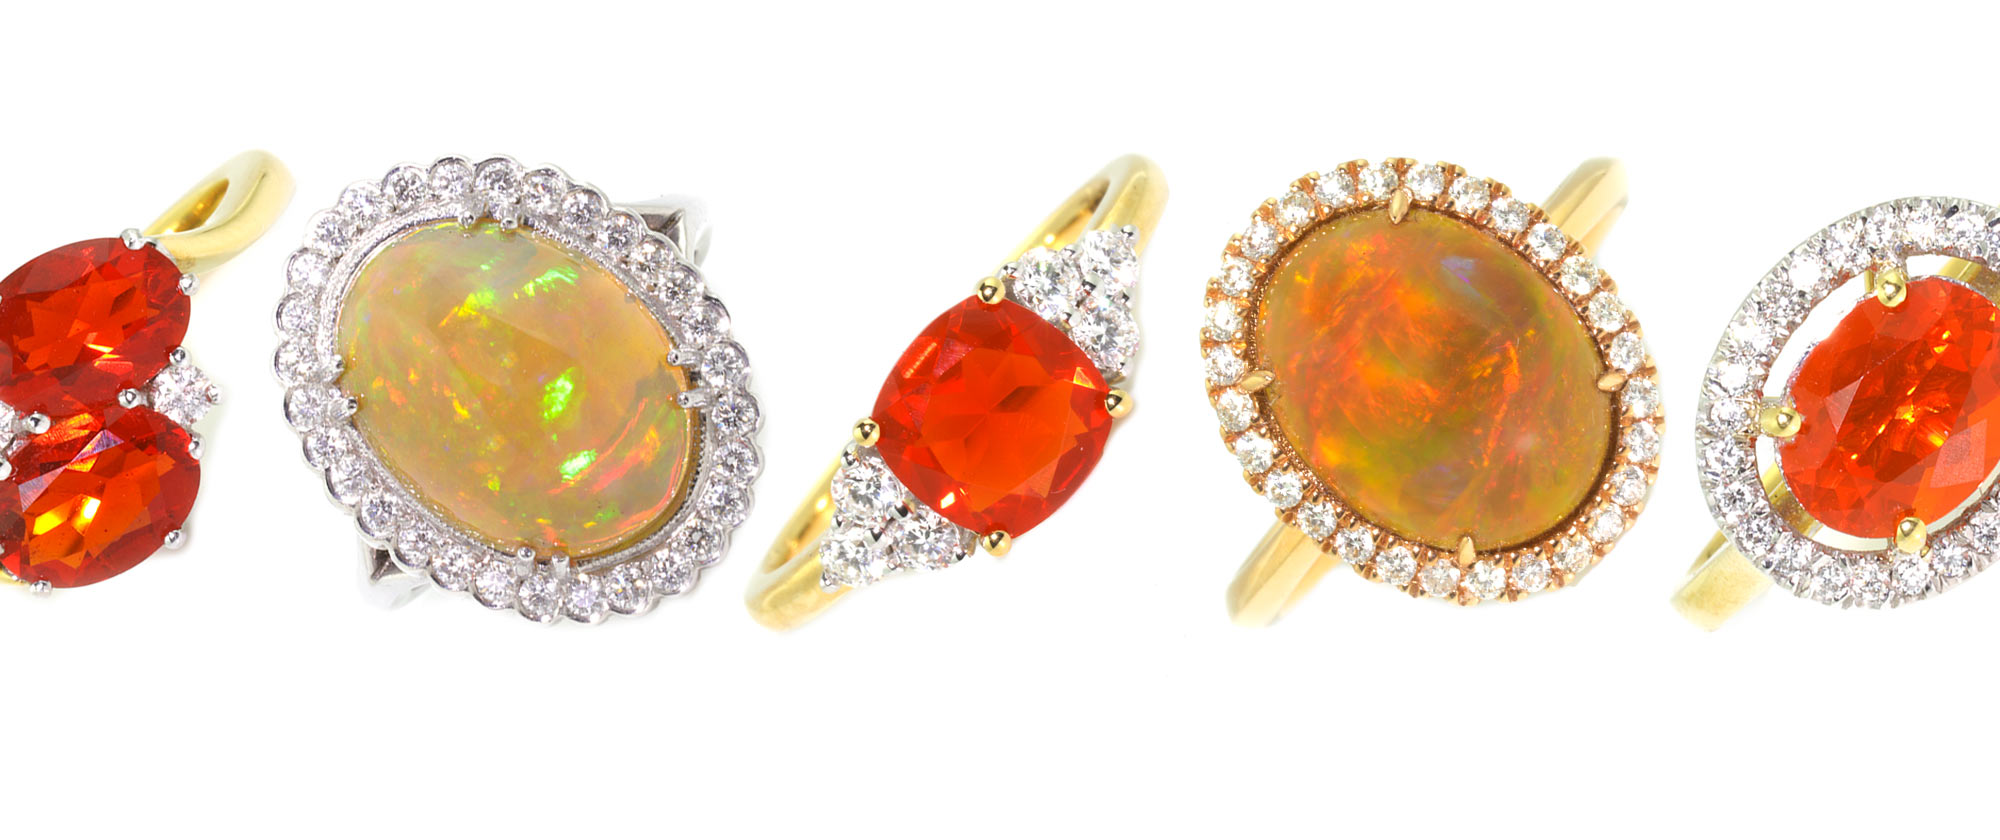 Opal & Fire Opal Selection at Studleys Jewellers Wells UK